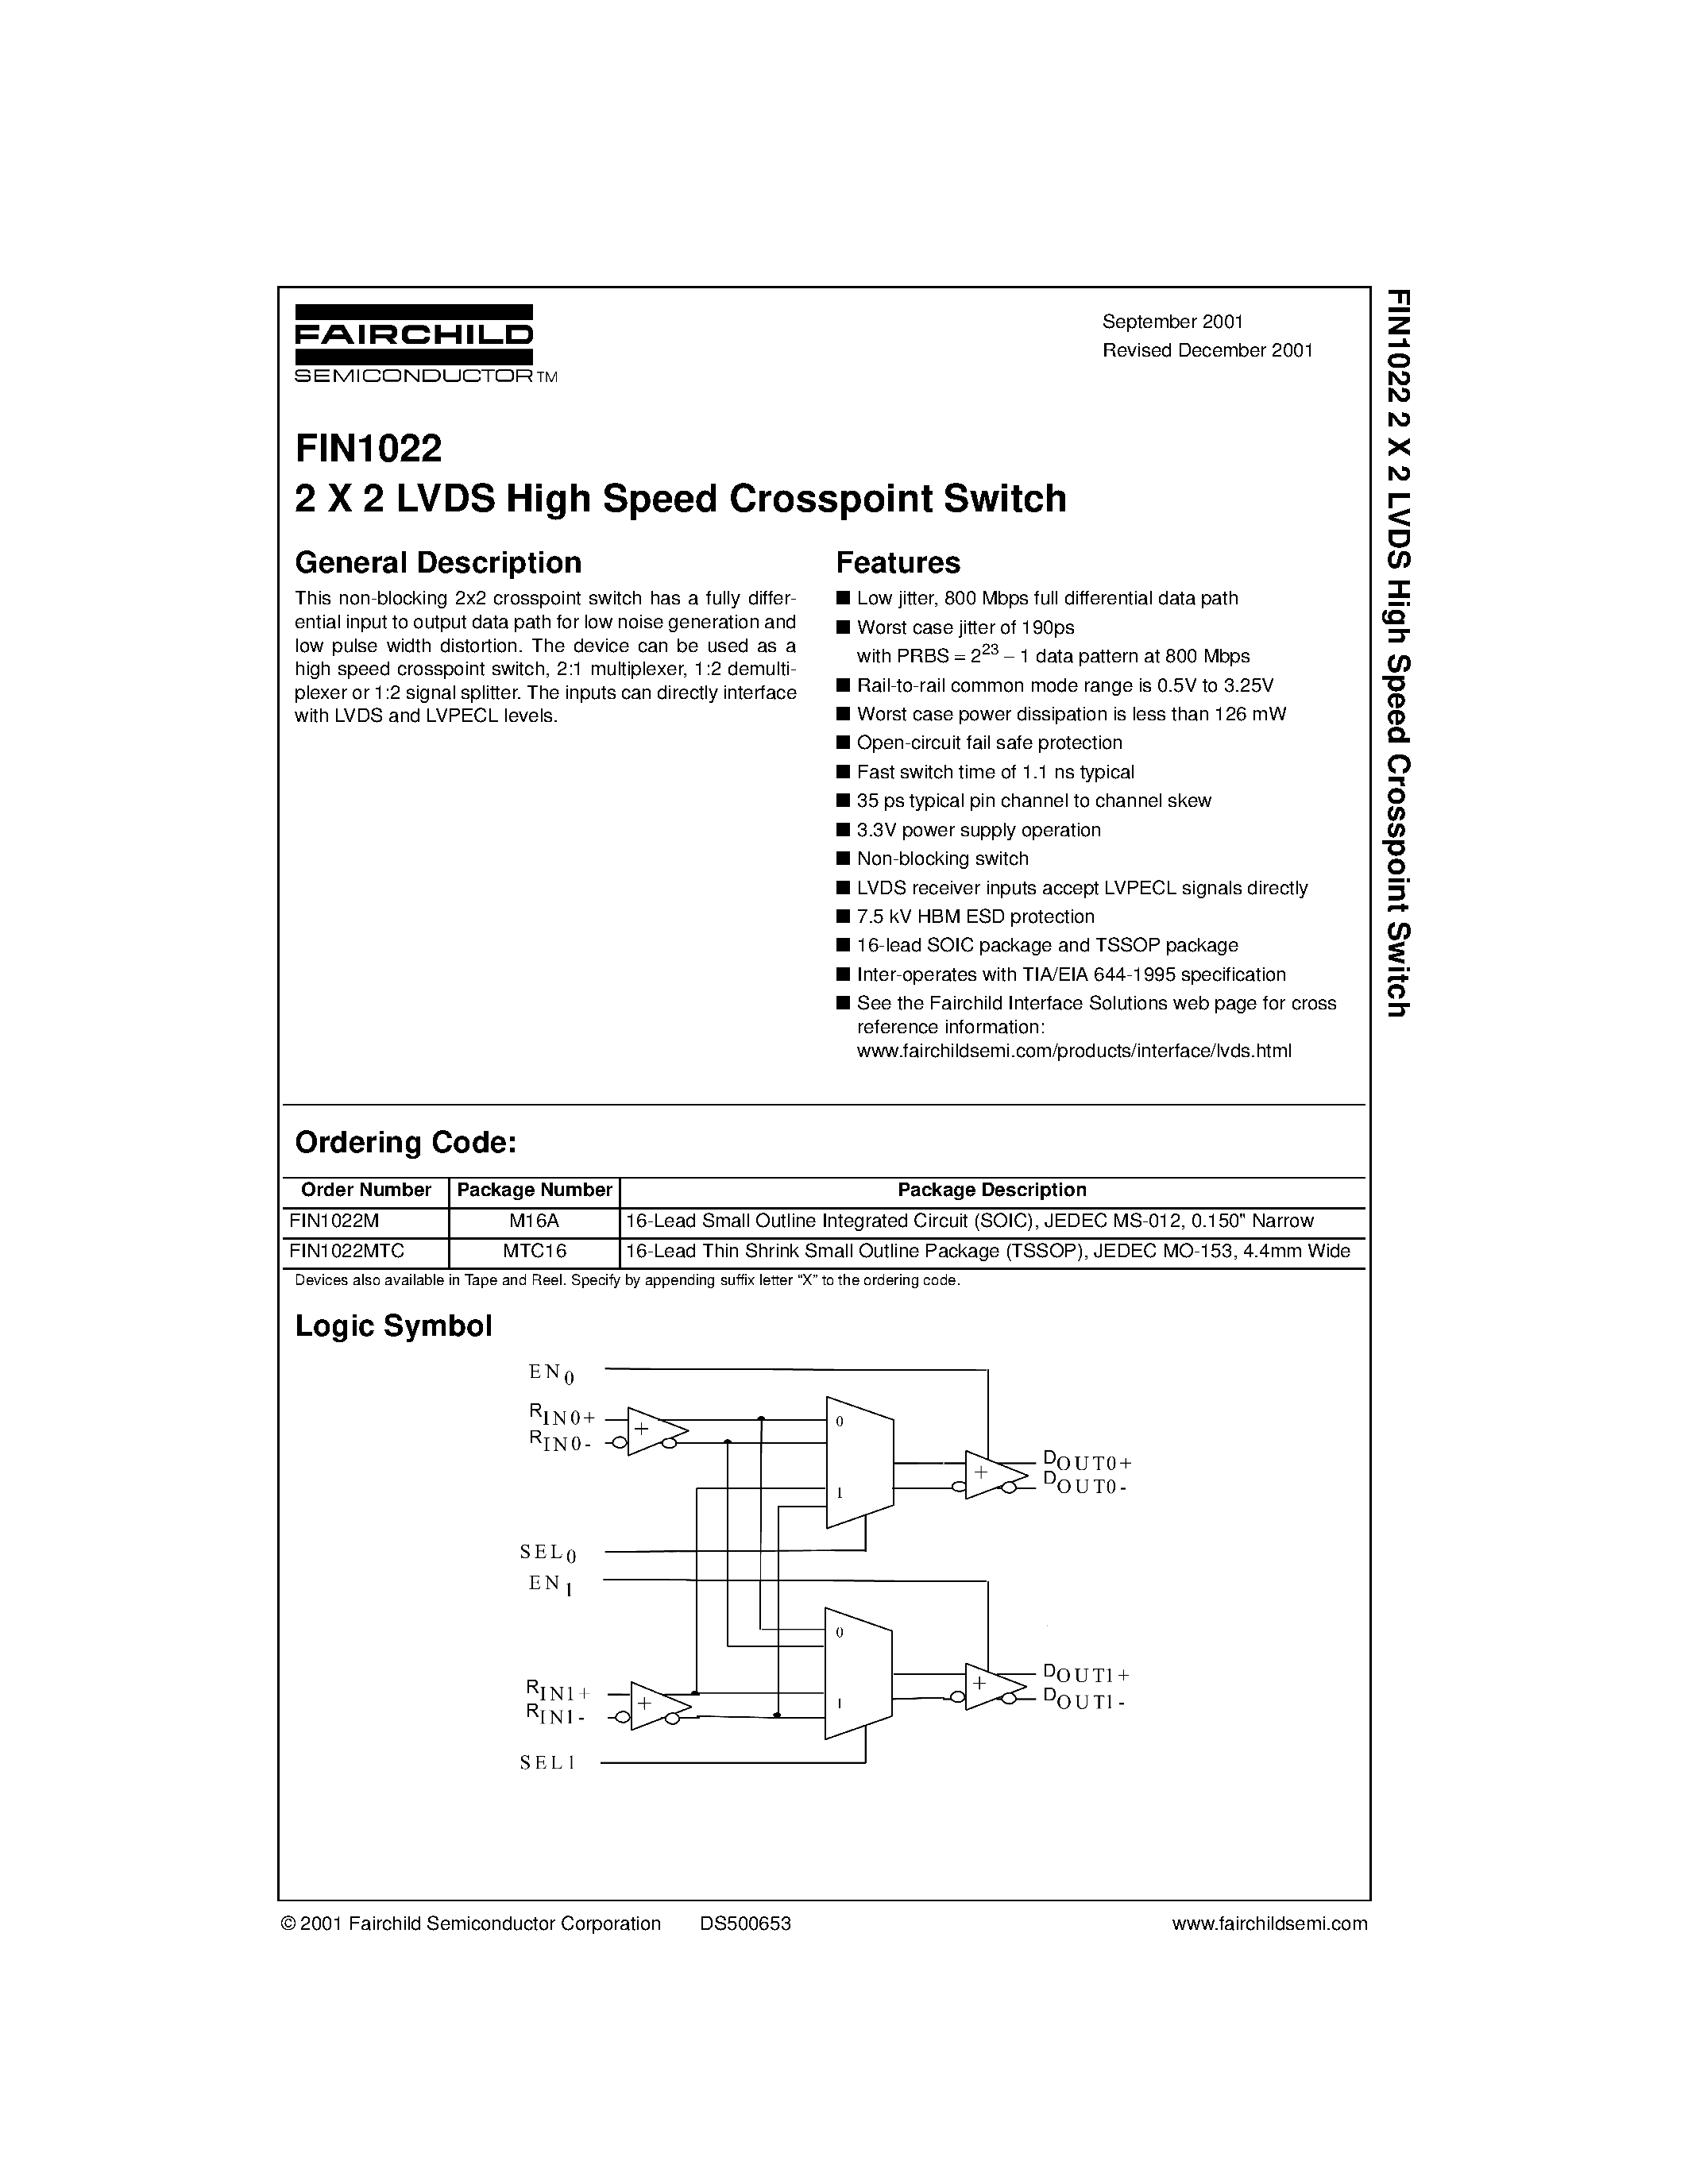 Datasheet FIN1022M - 2 X 2 LVDS High Speed Crosspoint Switch page 1